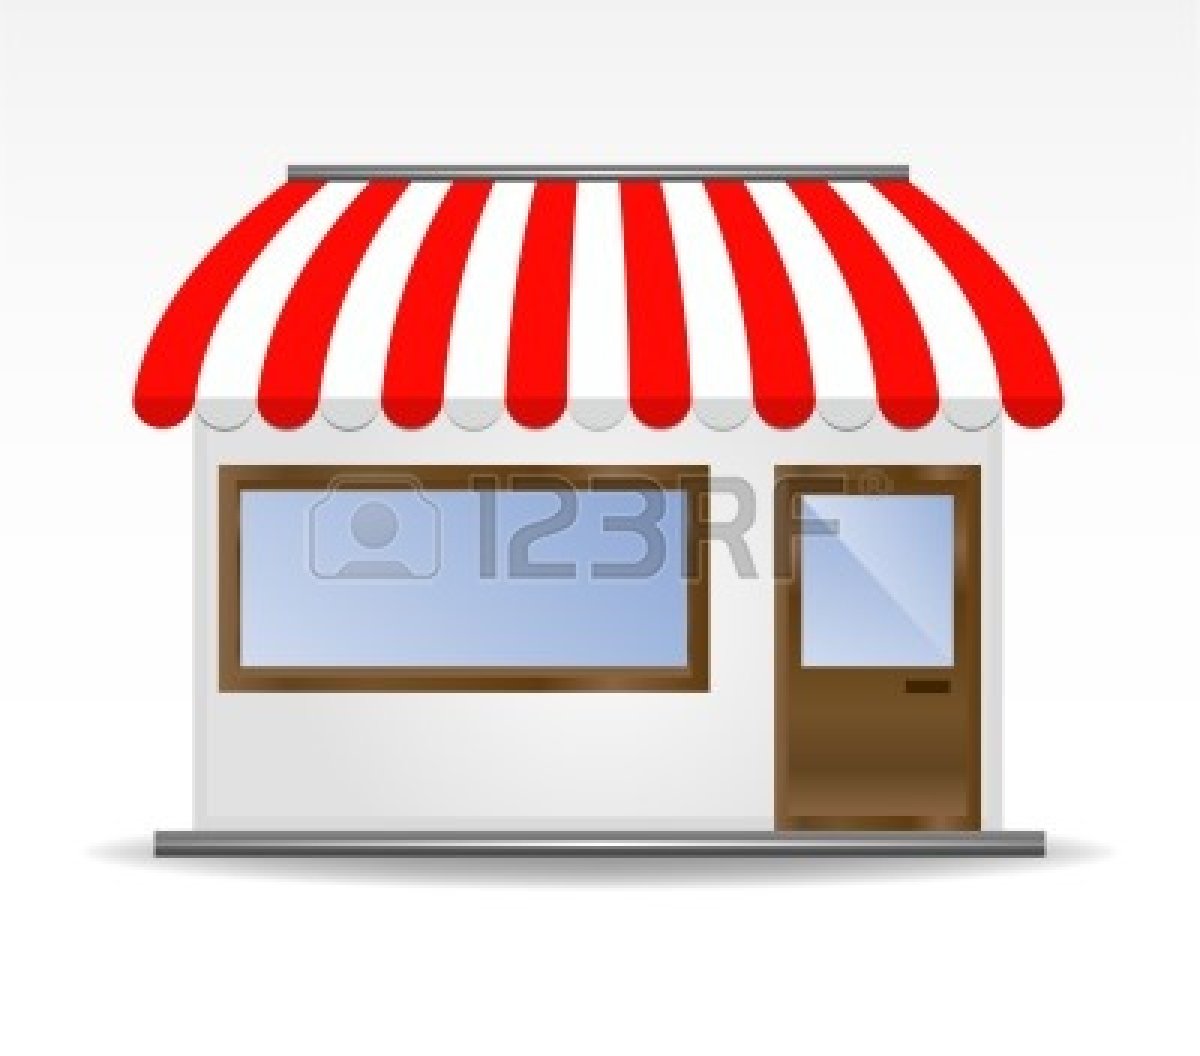 Storefront Clipart 9758746 Vector Illustration Of Storefront Awning In